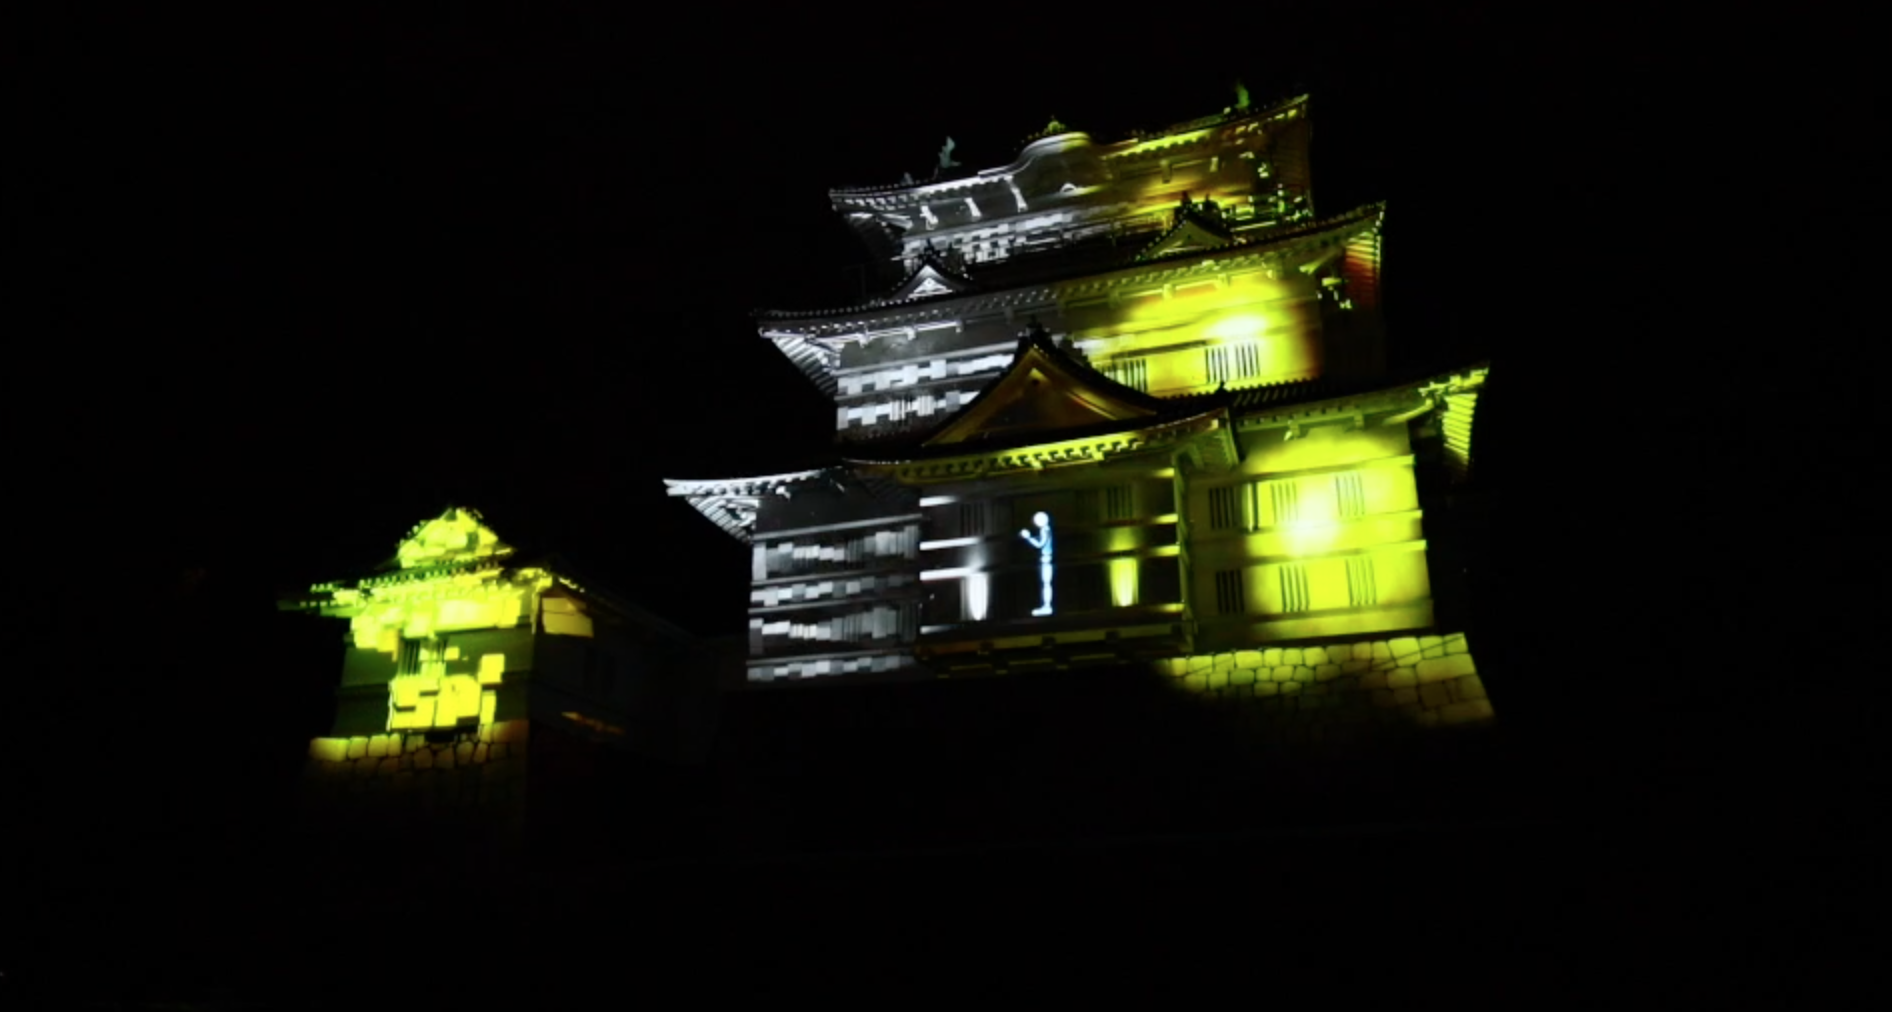 1minute Projection Mapping in Odawara castle